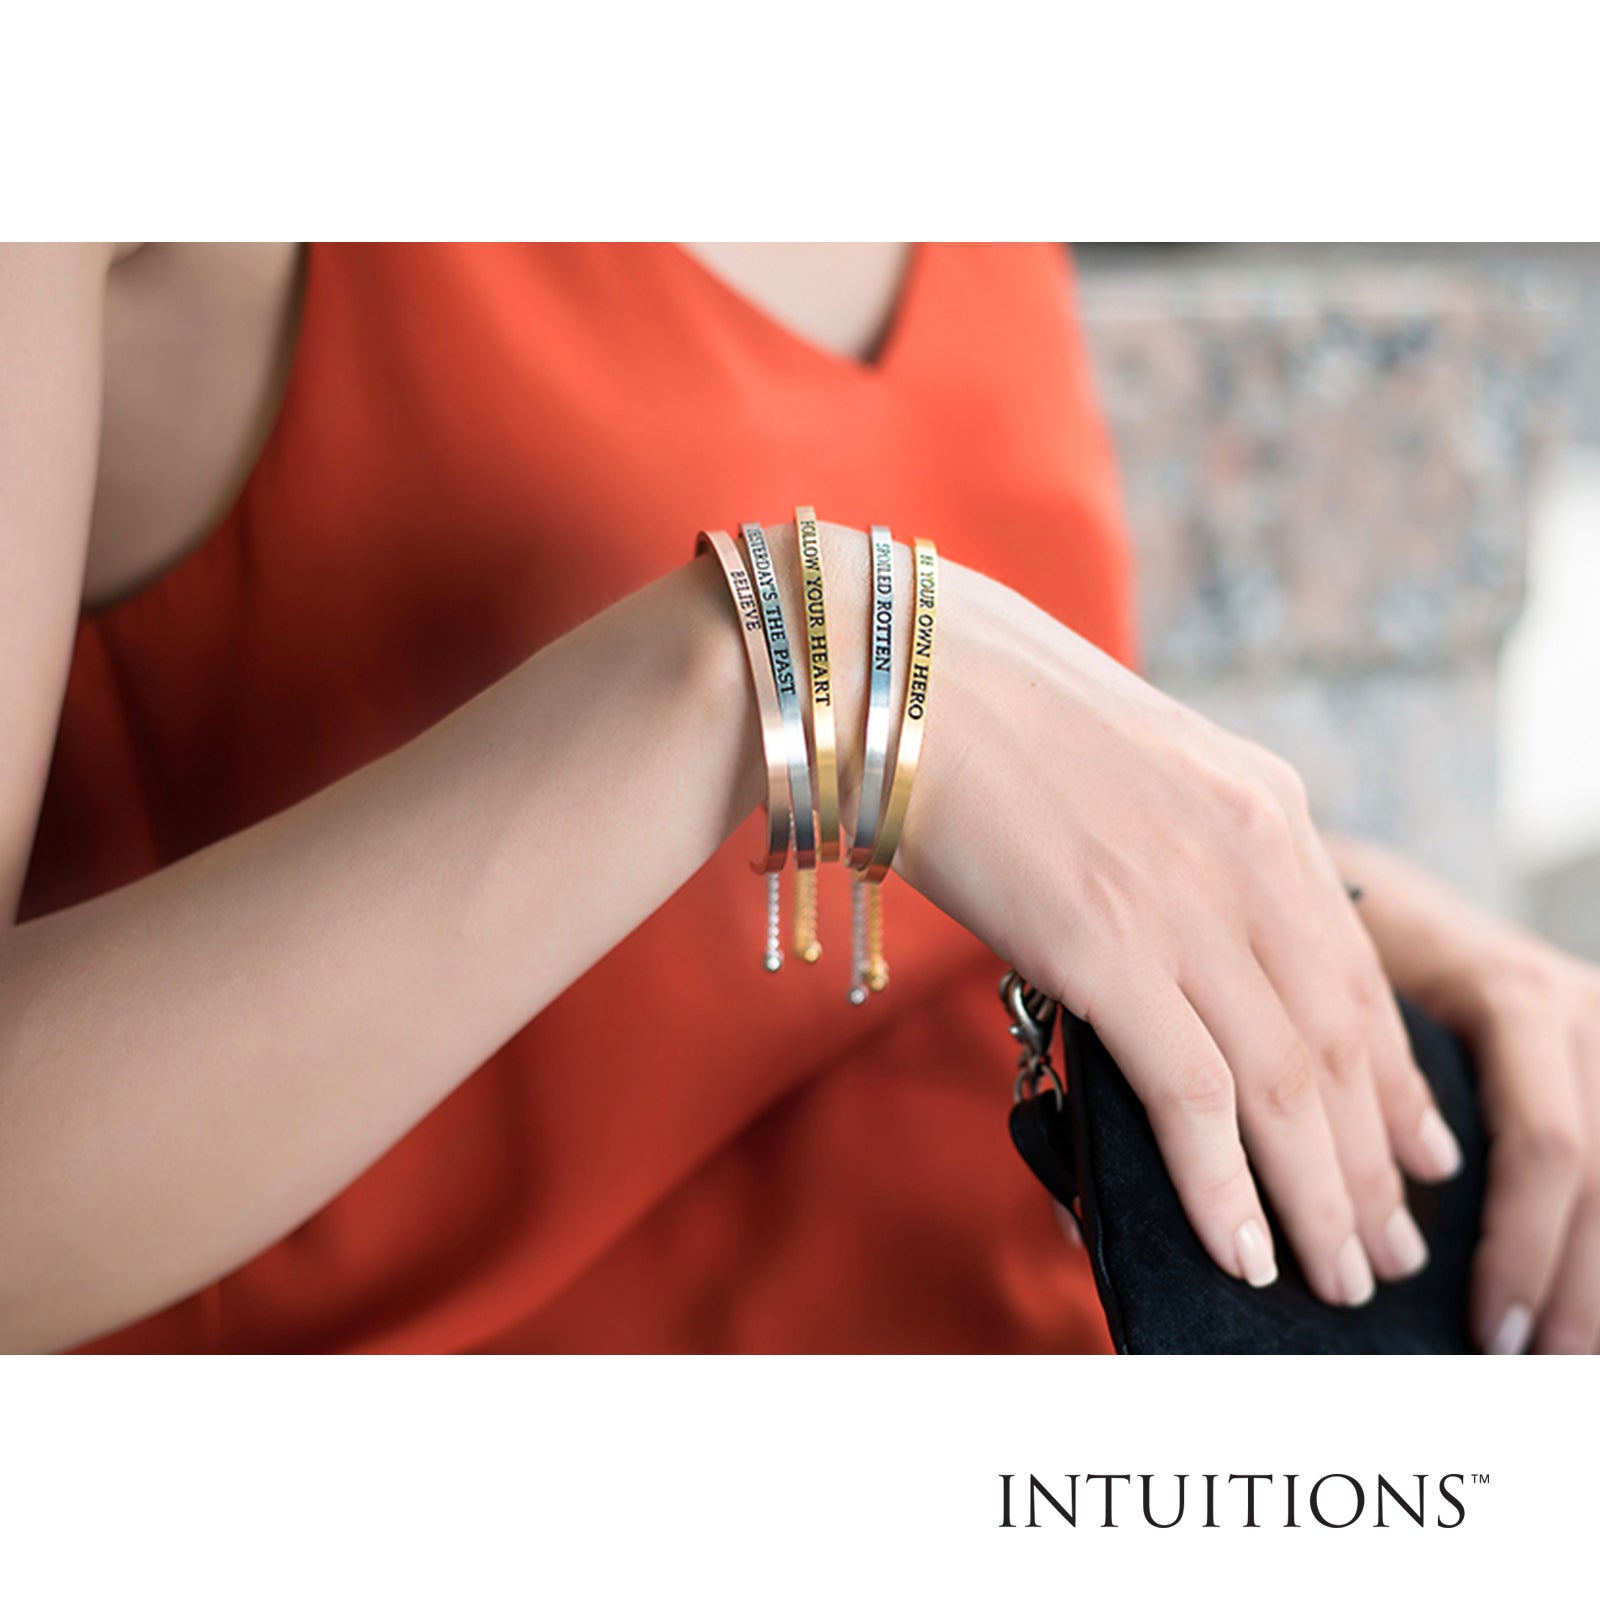 Intuitions Stainless Steel BE YOUR OWN HERO Diamond Accent Adjustable Bracelet fine designer jewelry for men and women